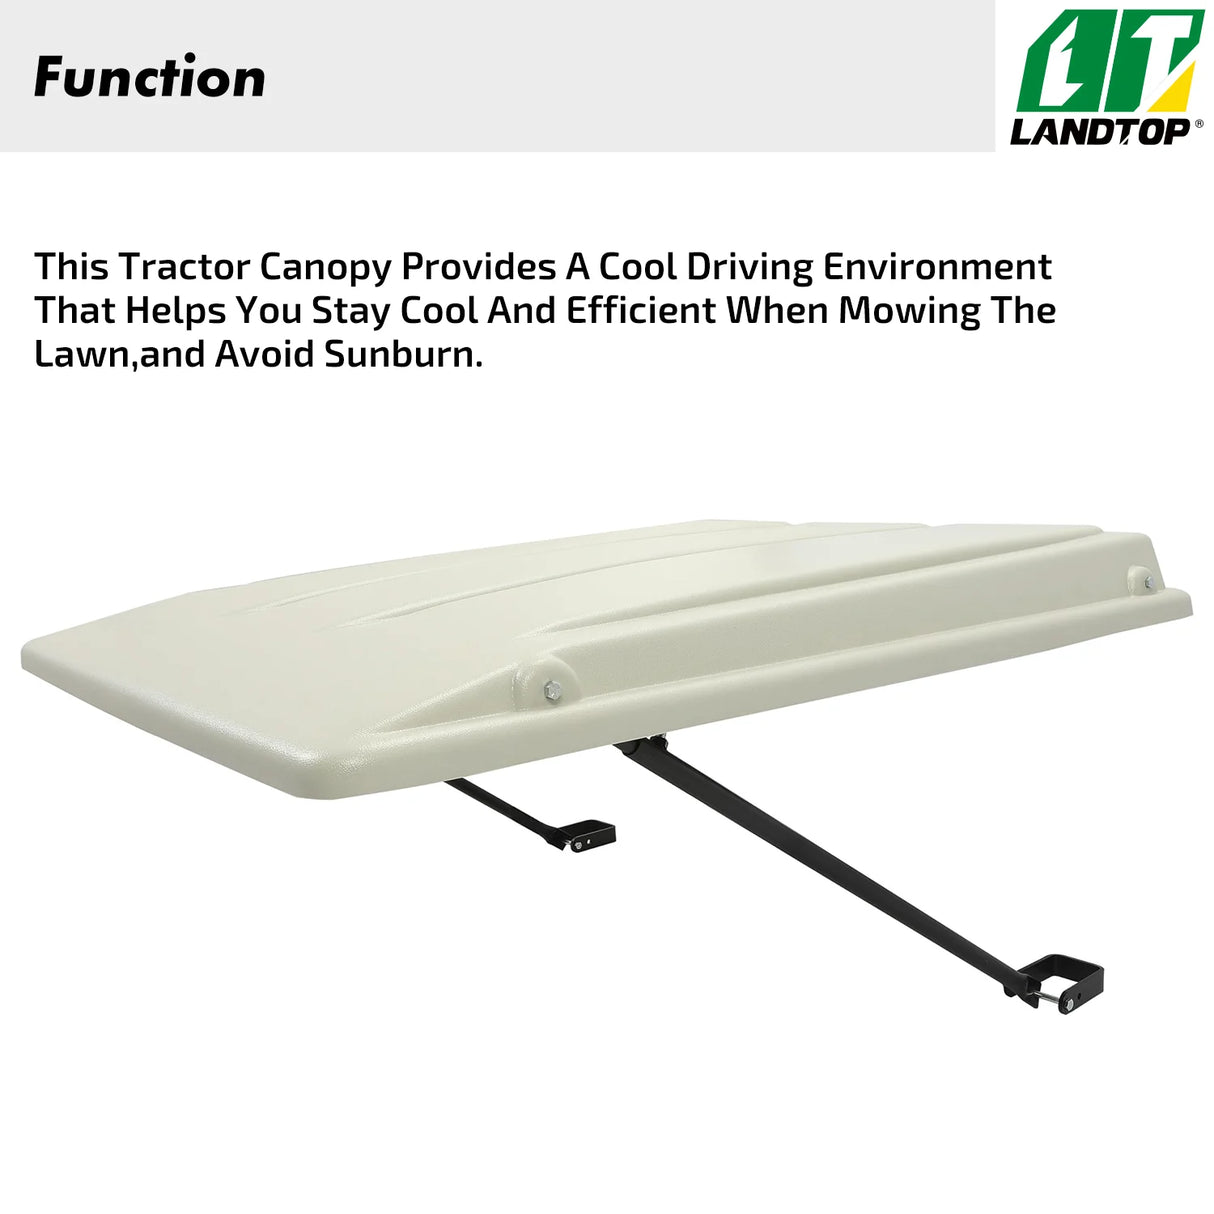 White Tractor Canopy Compatible with John Deere Compact Utility Tractors with ROPS 34" Wide or Less. Fit 1 1/2" x 3", 2" x 2" or 2" x 3" ROPS Sun Shade Canopy with Bracket 36" W x 40" L